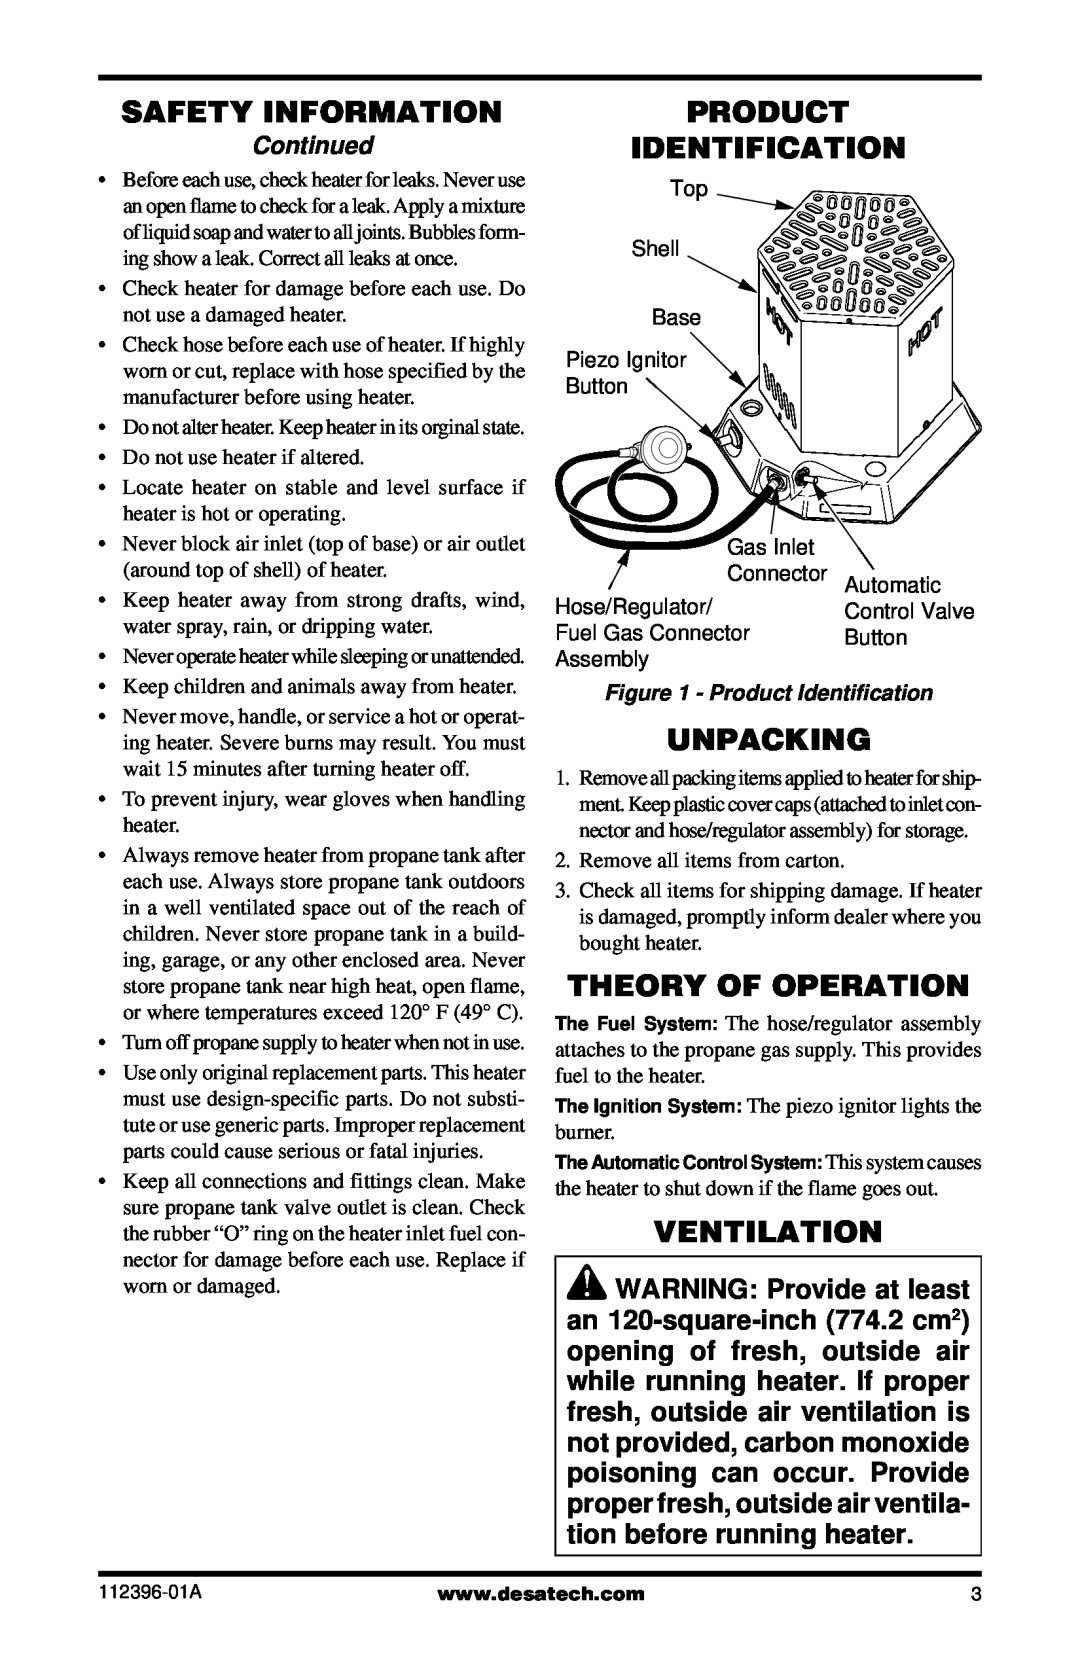 Desa CANADIAN PROPANE CONSTRUCTION CONVECTION HEATER Safety Information, Product Identification, Unpacking, Ventilation 